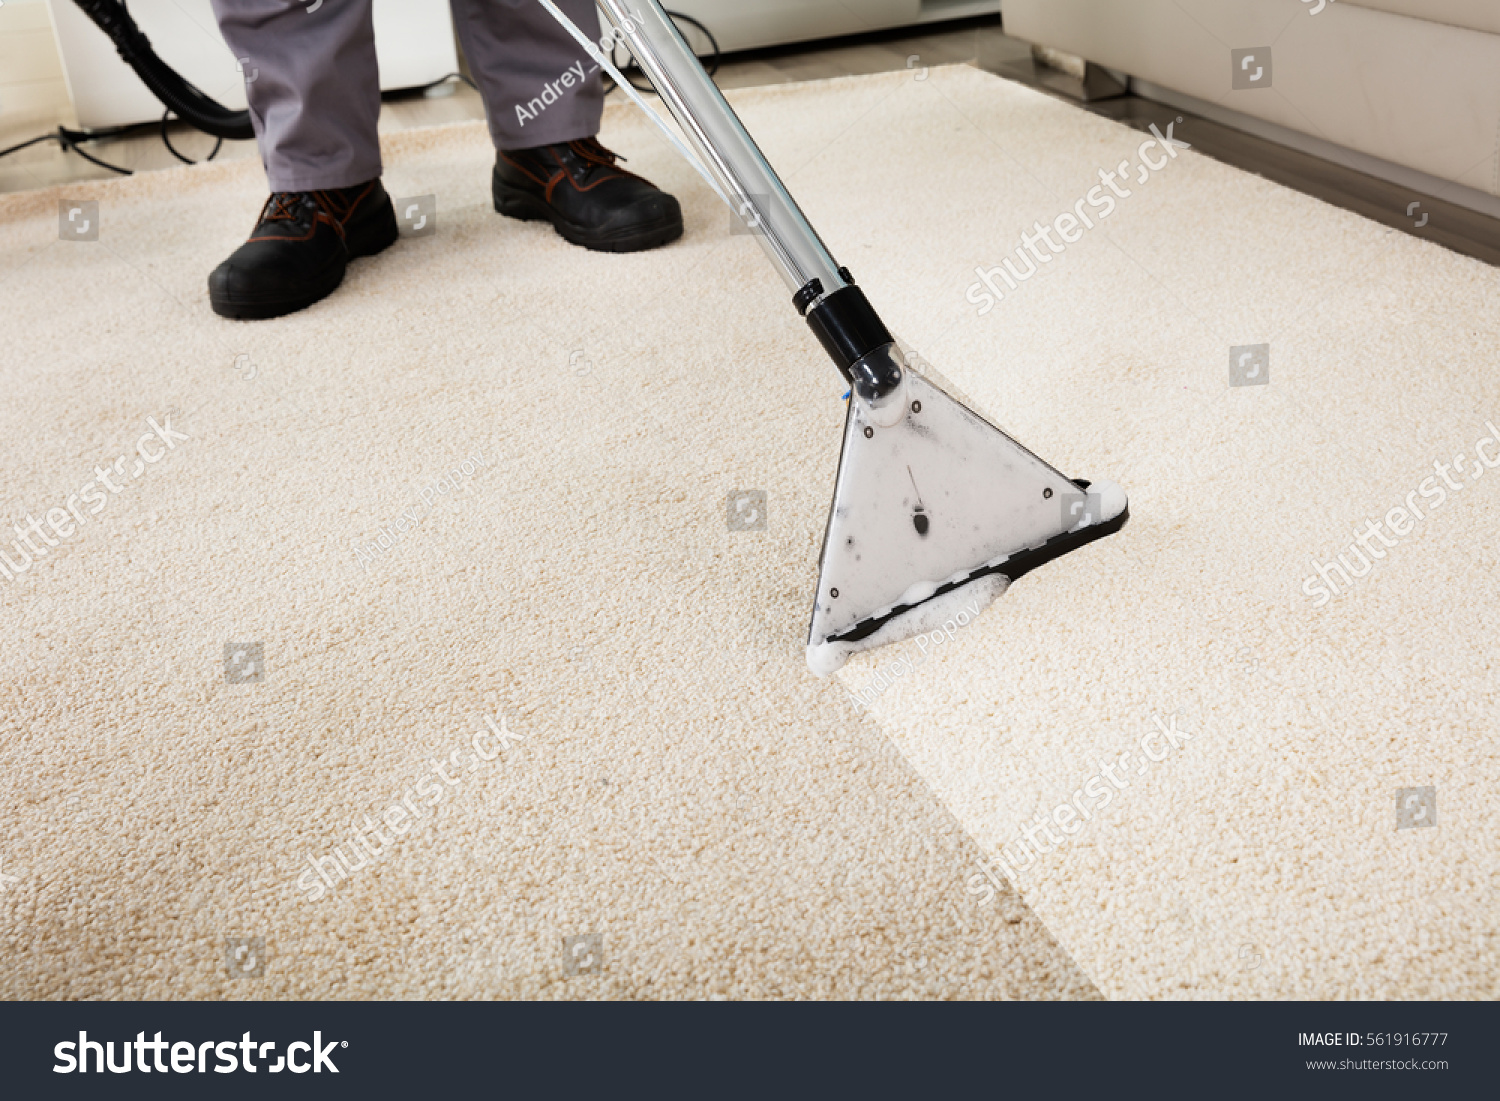 Close-up Of A Person Cleaning Carpet With Vacuum Cleaner #561916777